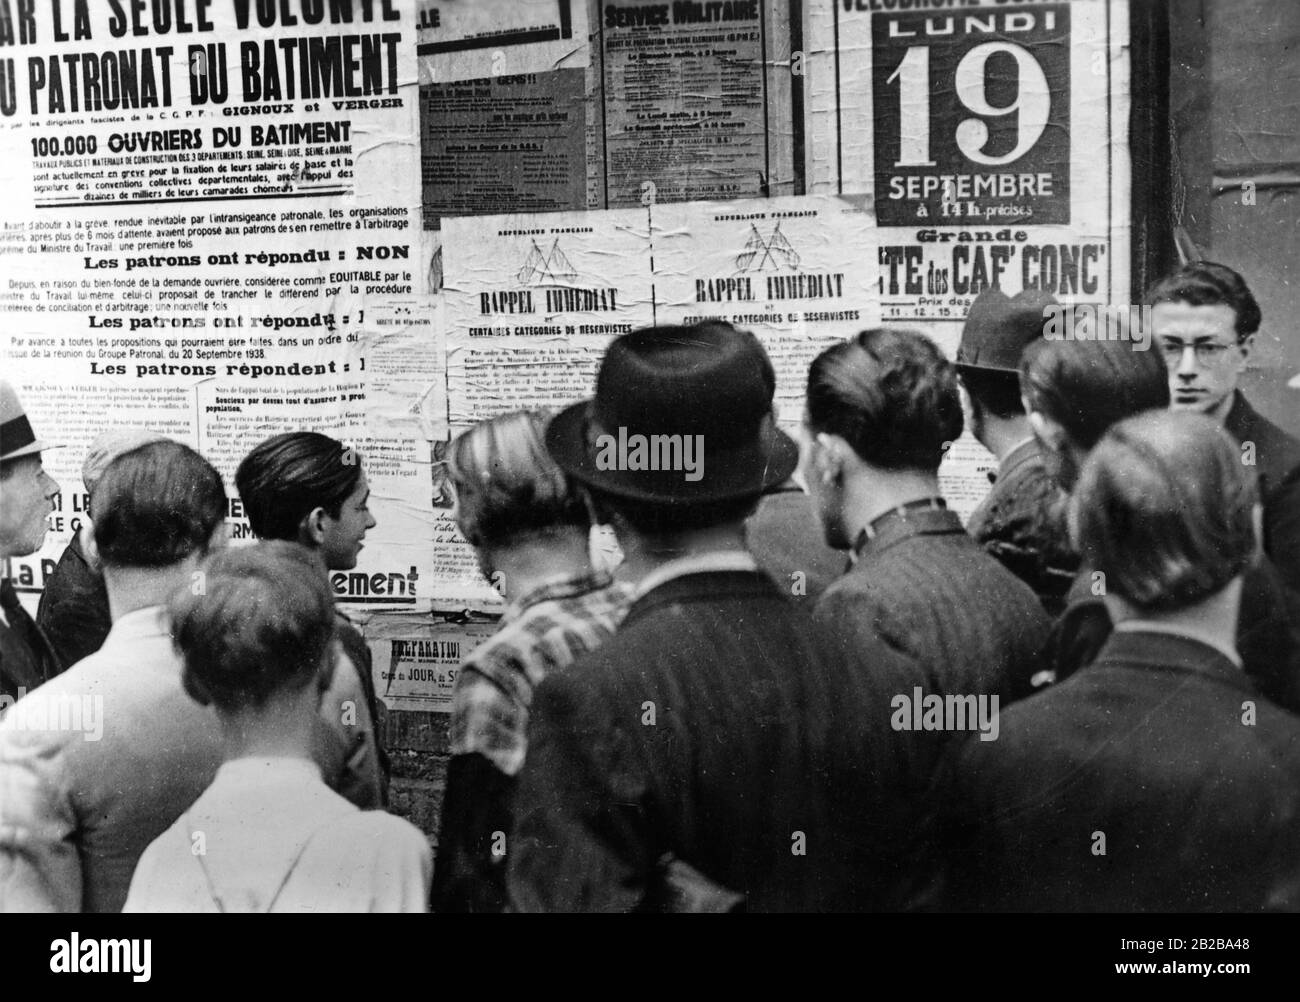 In the course of the Sudeten crisis, which resulted in the Munich agreement, France issued conscription orders. The picture shows draft notices that have been posted for the first time at town halls. Residents of a Parisian suburb read such an announcement. Stock Photo